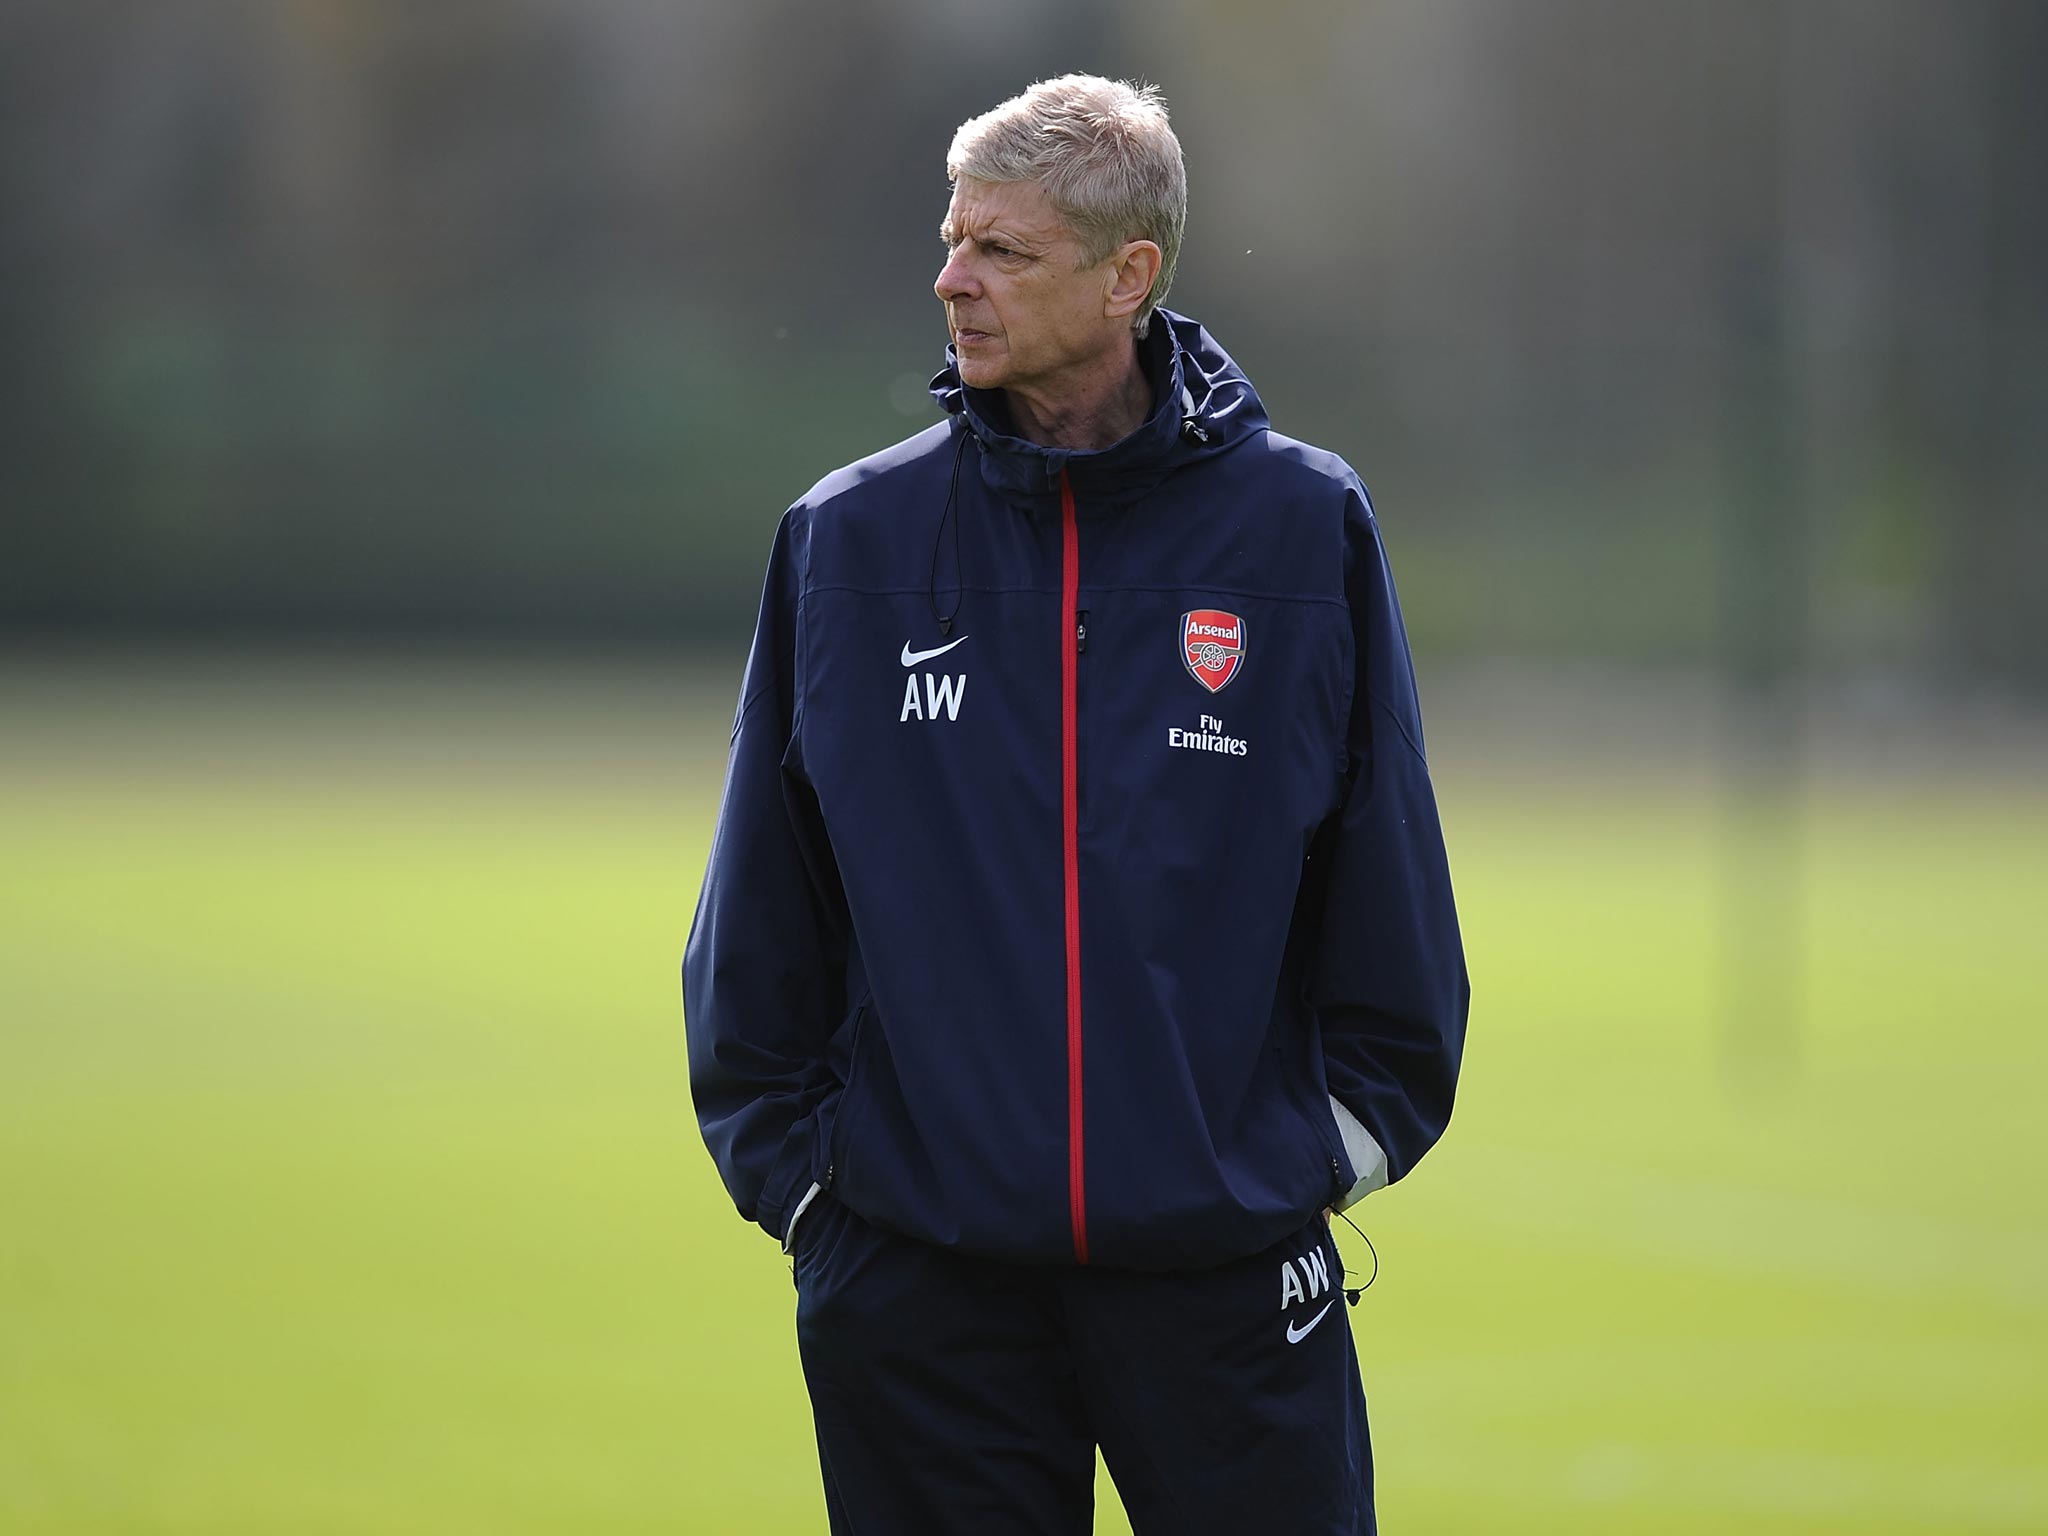 Arsene Wenger has questioned whether Arsenal have become complacent with their Champions League qualification